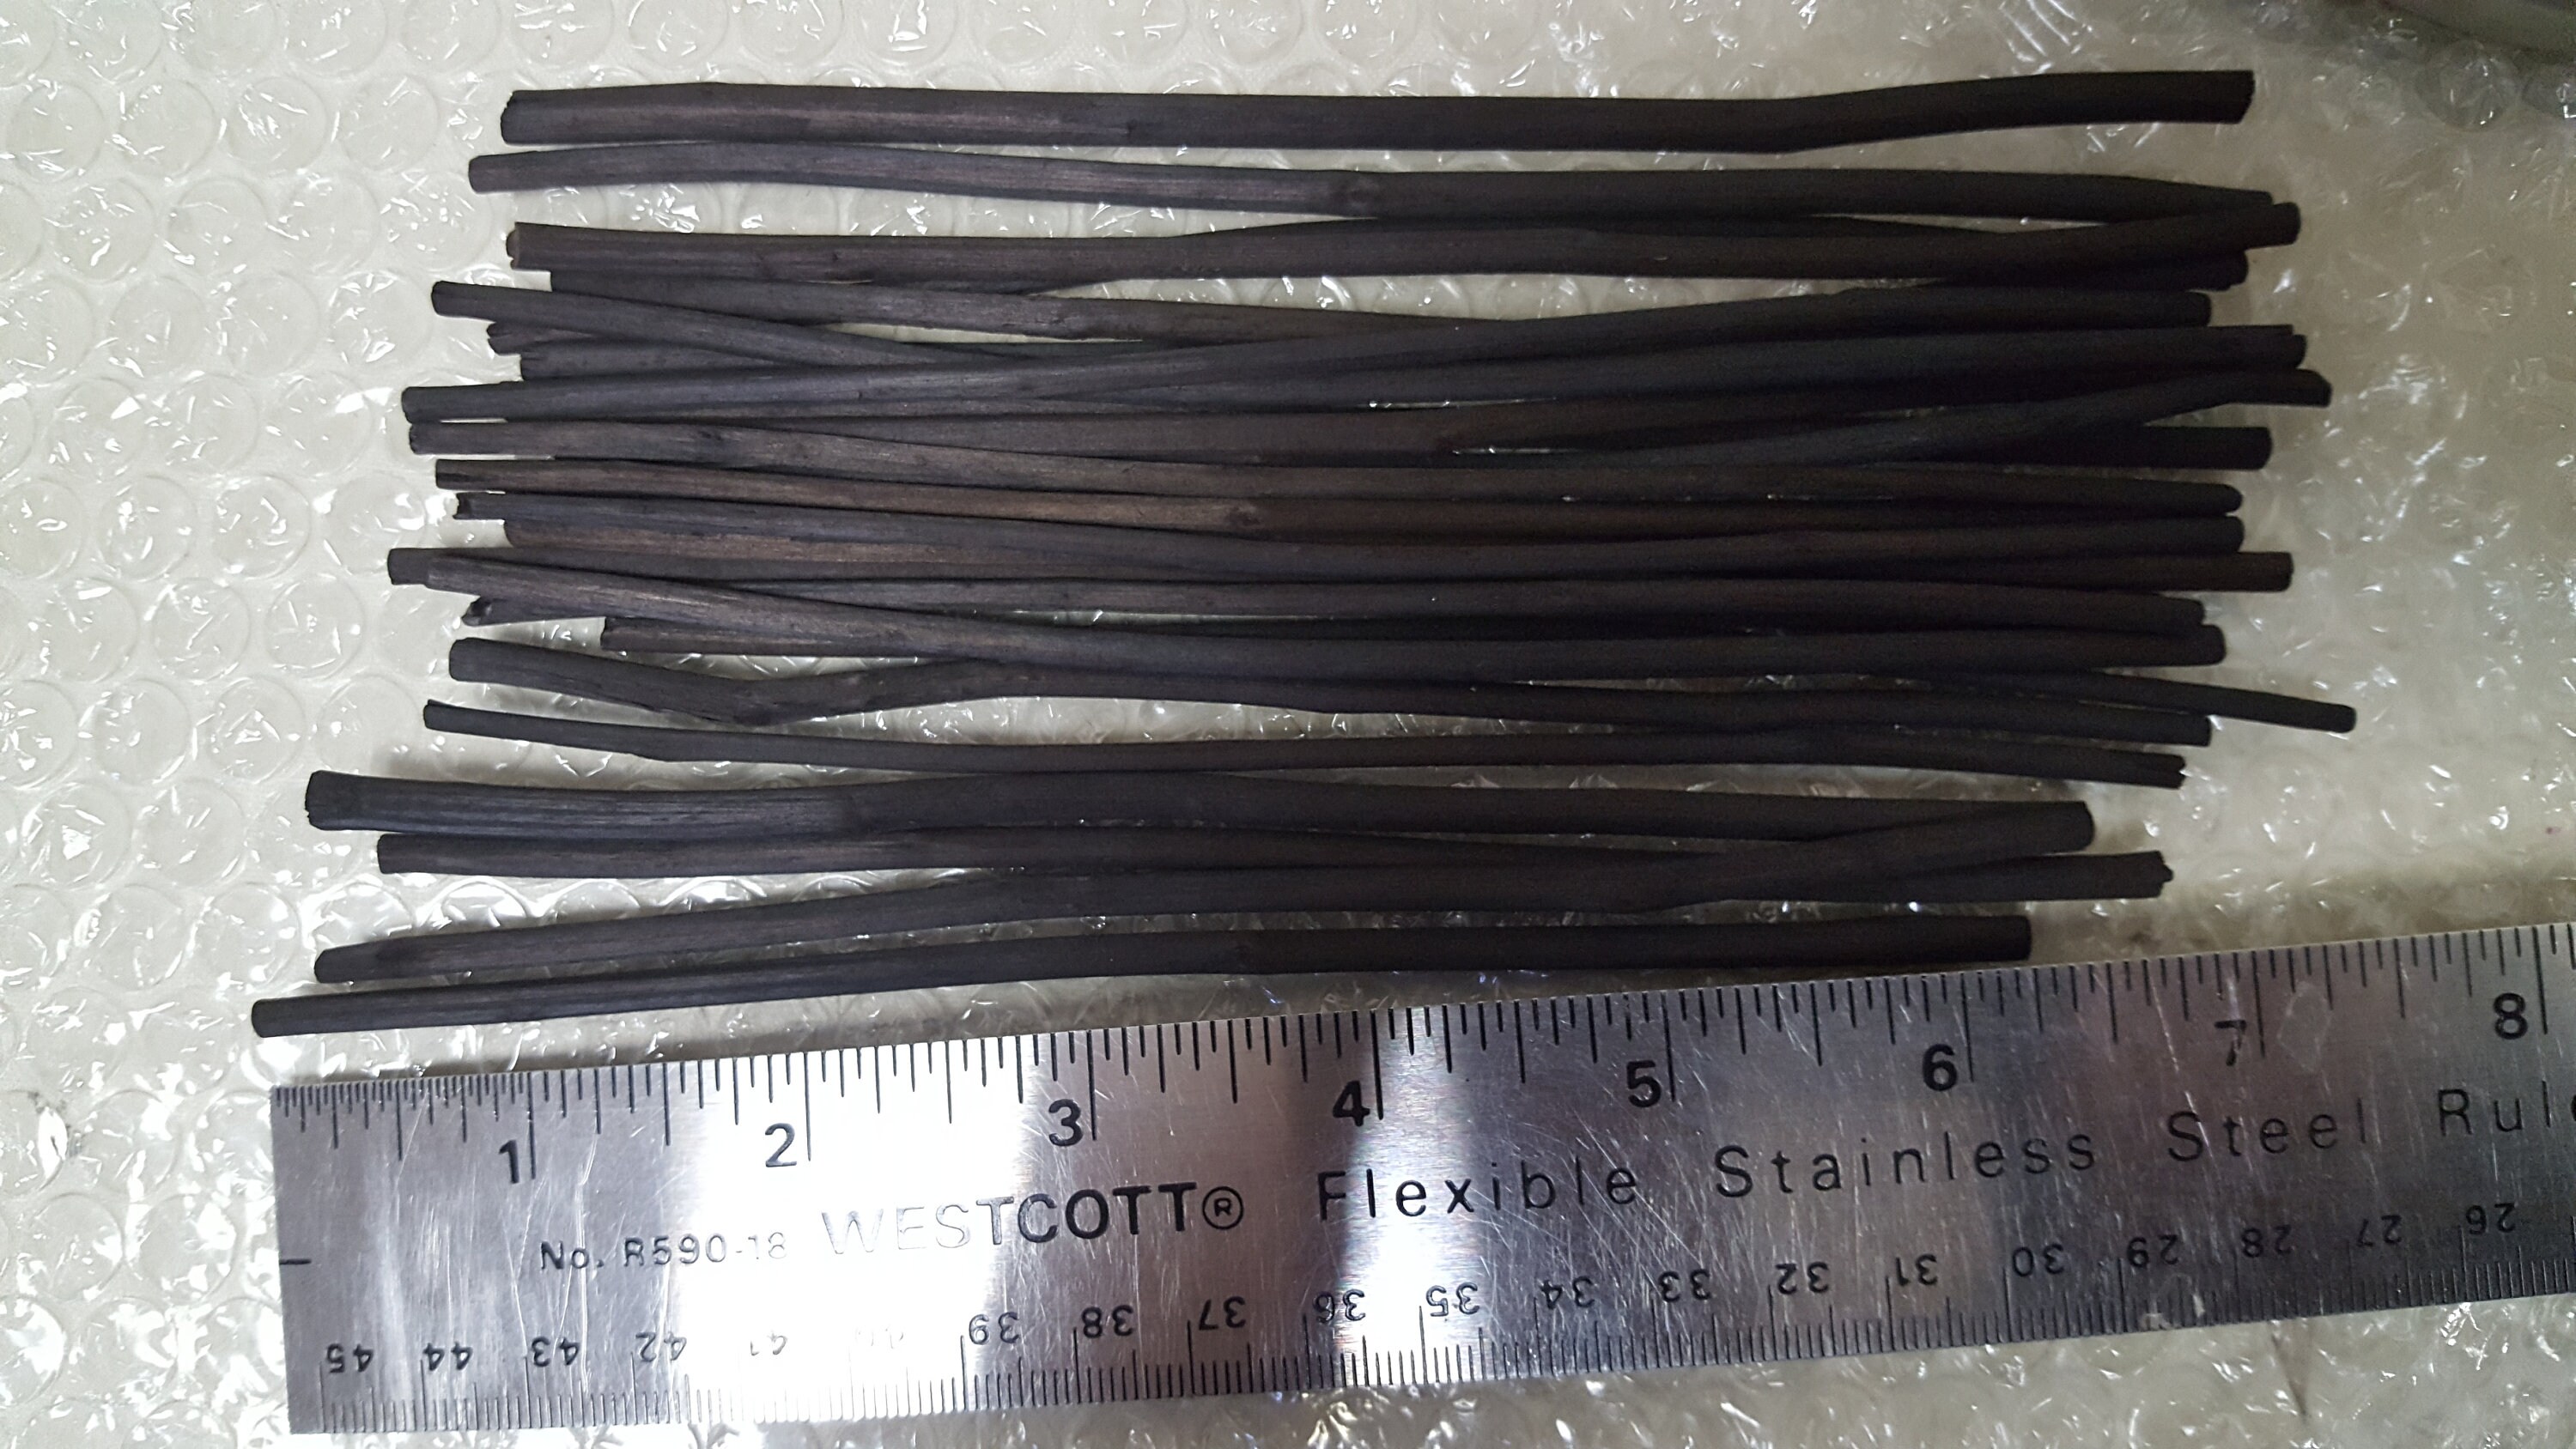 25 Pcs Artist Quality Willow Charcoal Sticks Round 5mm made in